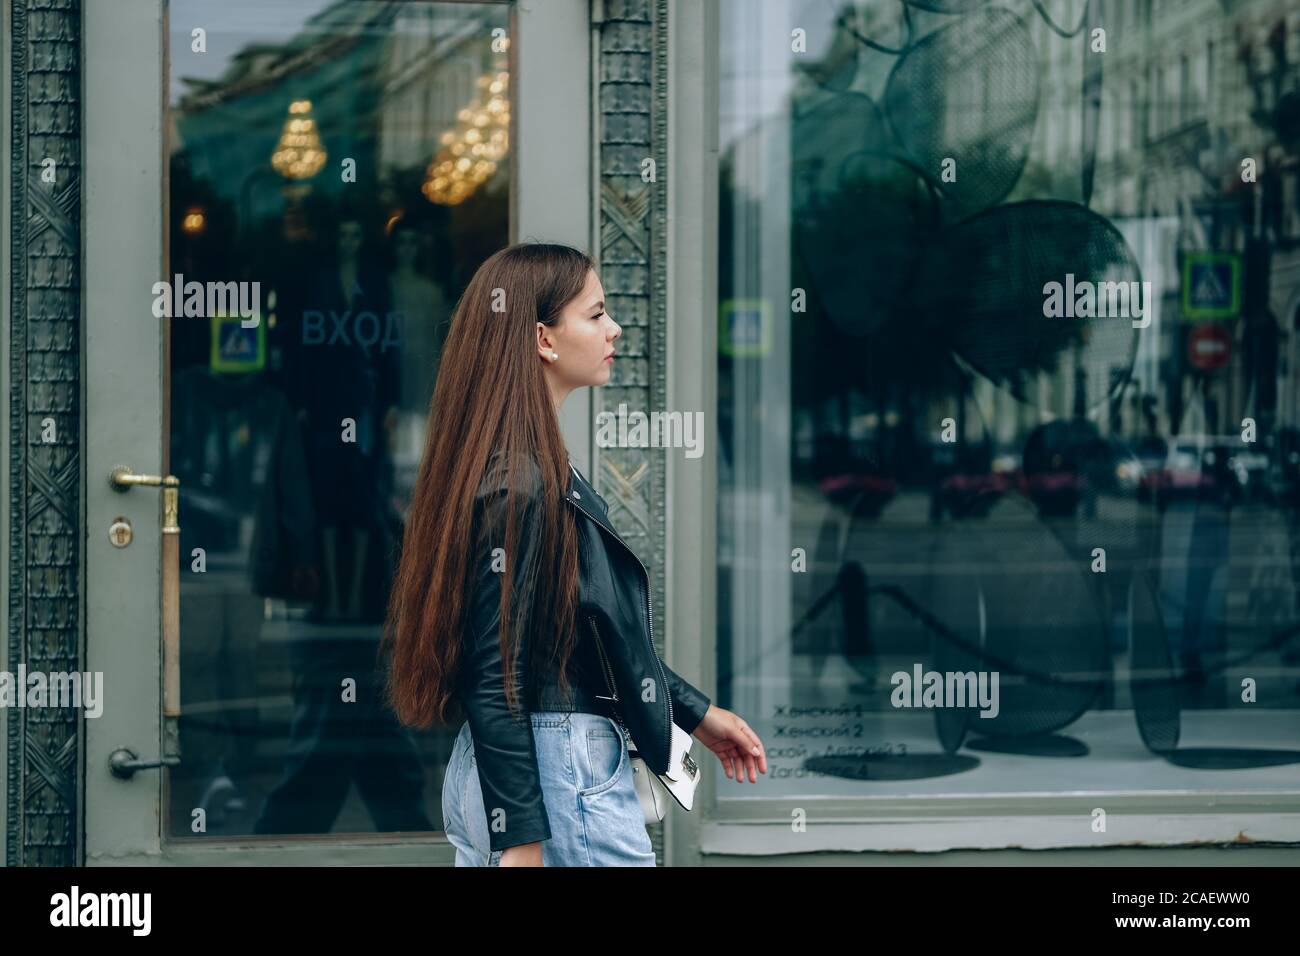 Young woman with long hair walking along the street of a big city, reflected in big shop windows. Saint Petersburg, Russia. Stock Photo